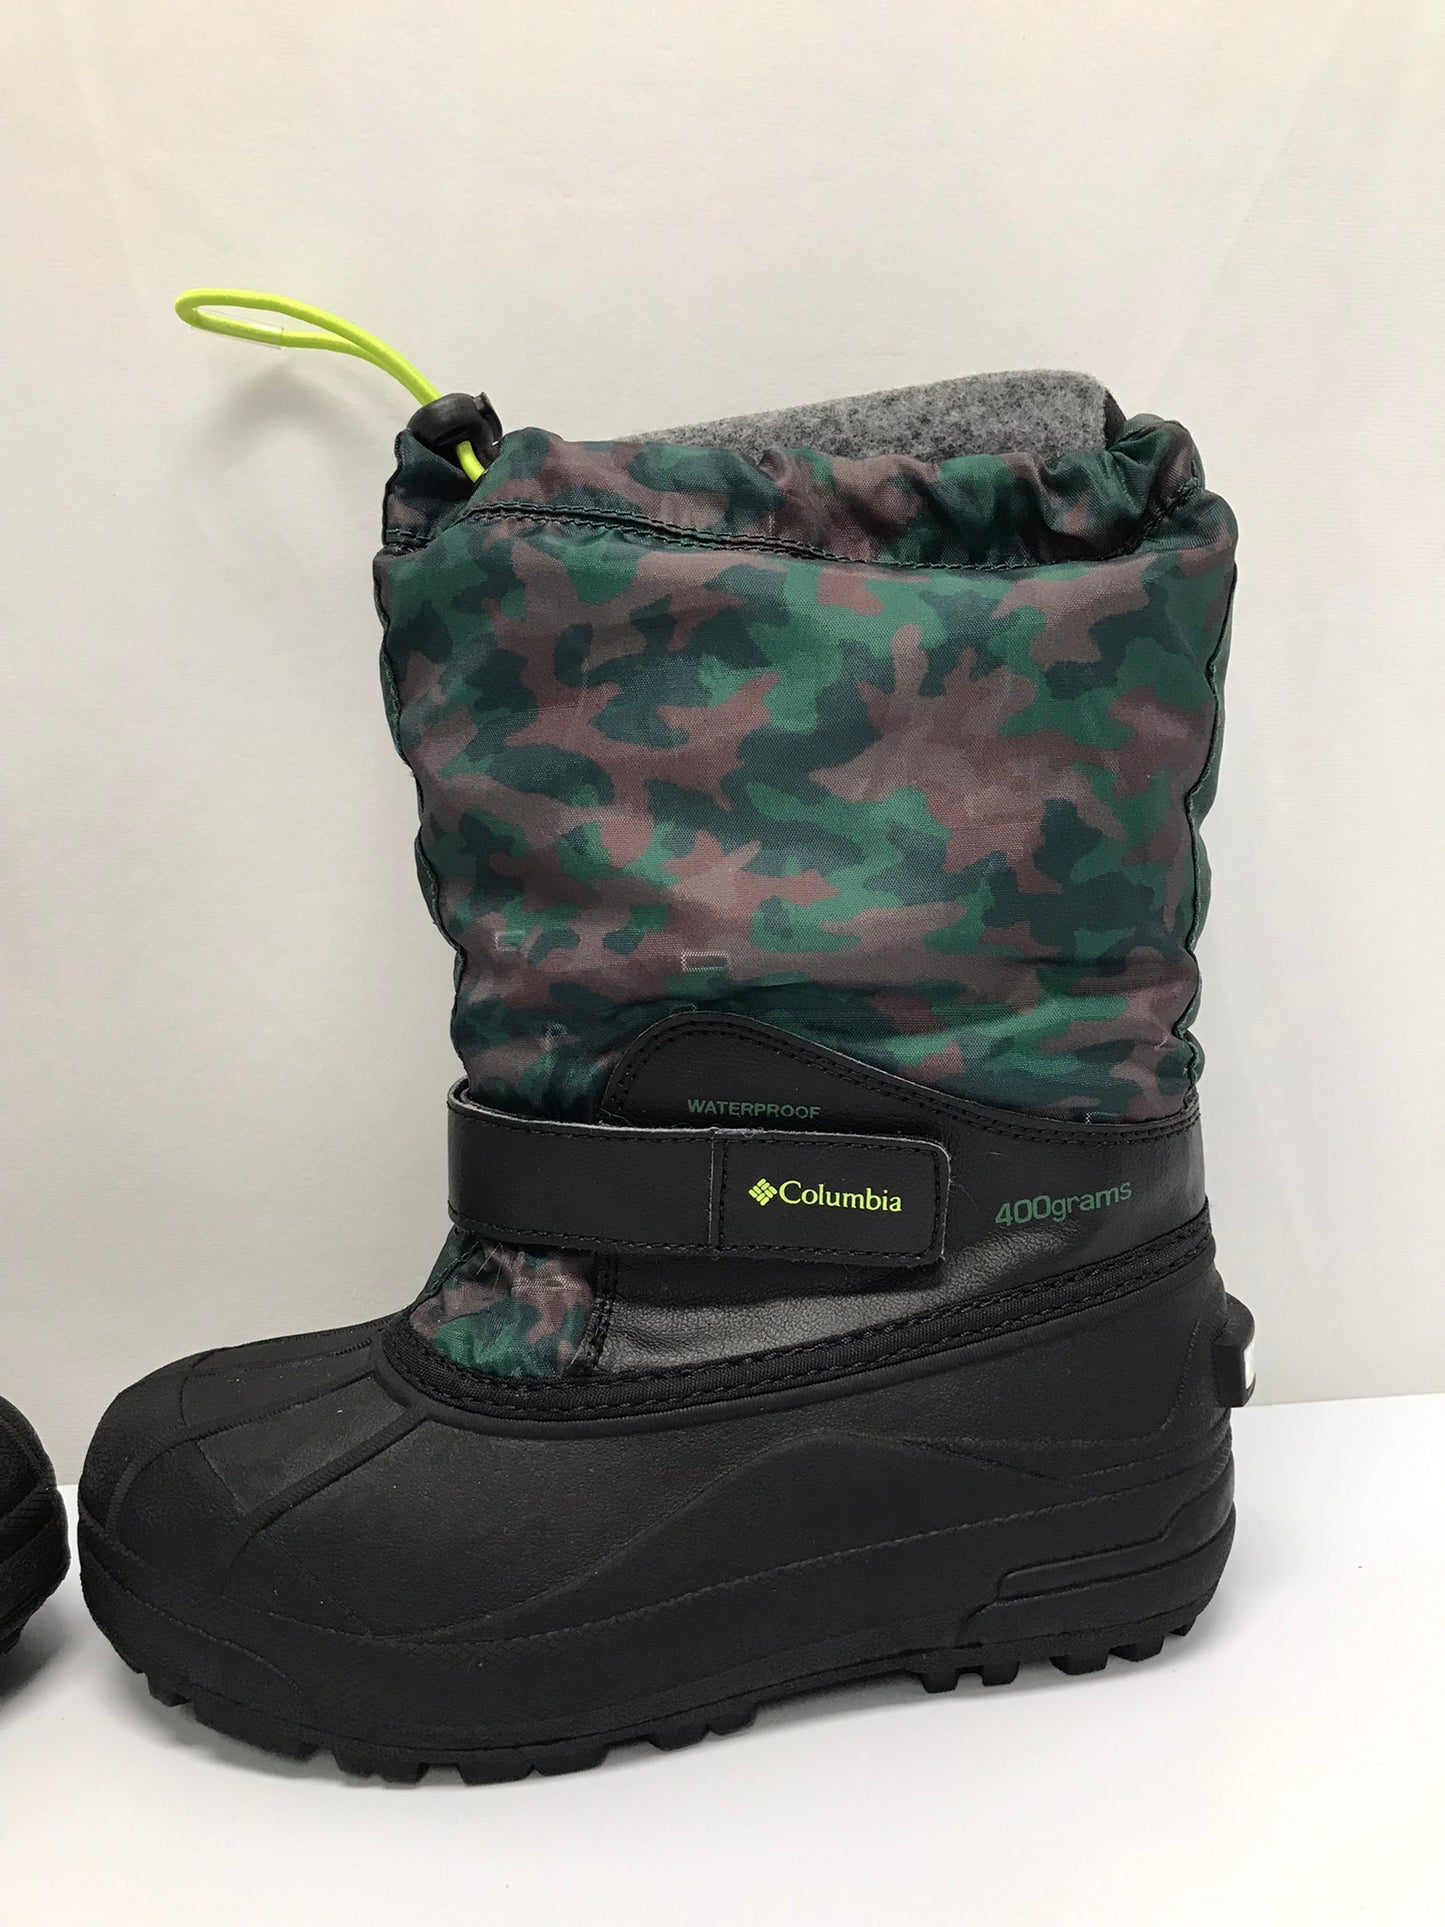 Winter Boots Child Size 3 Columbia With Liner Green Black As New